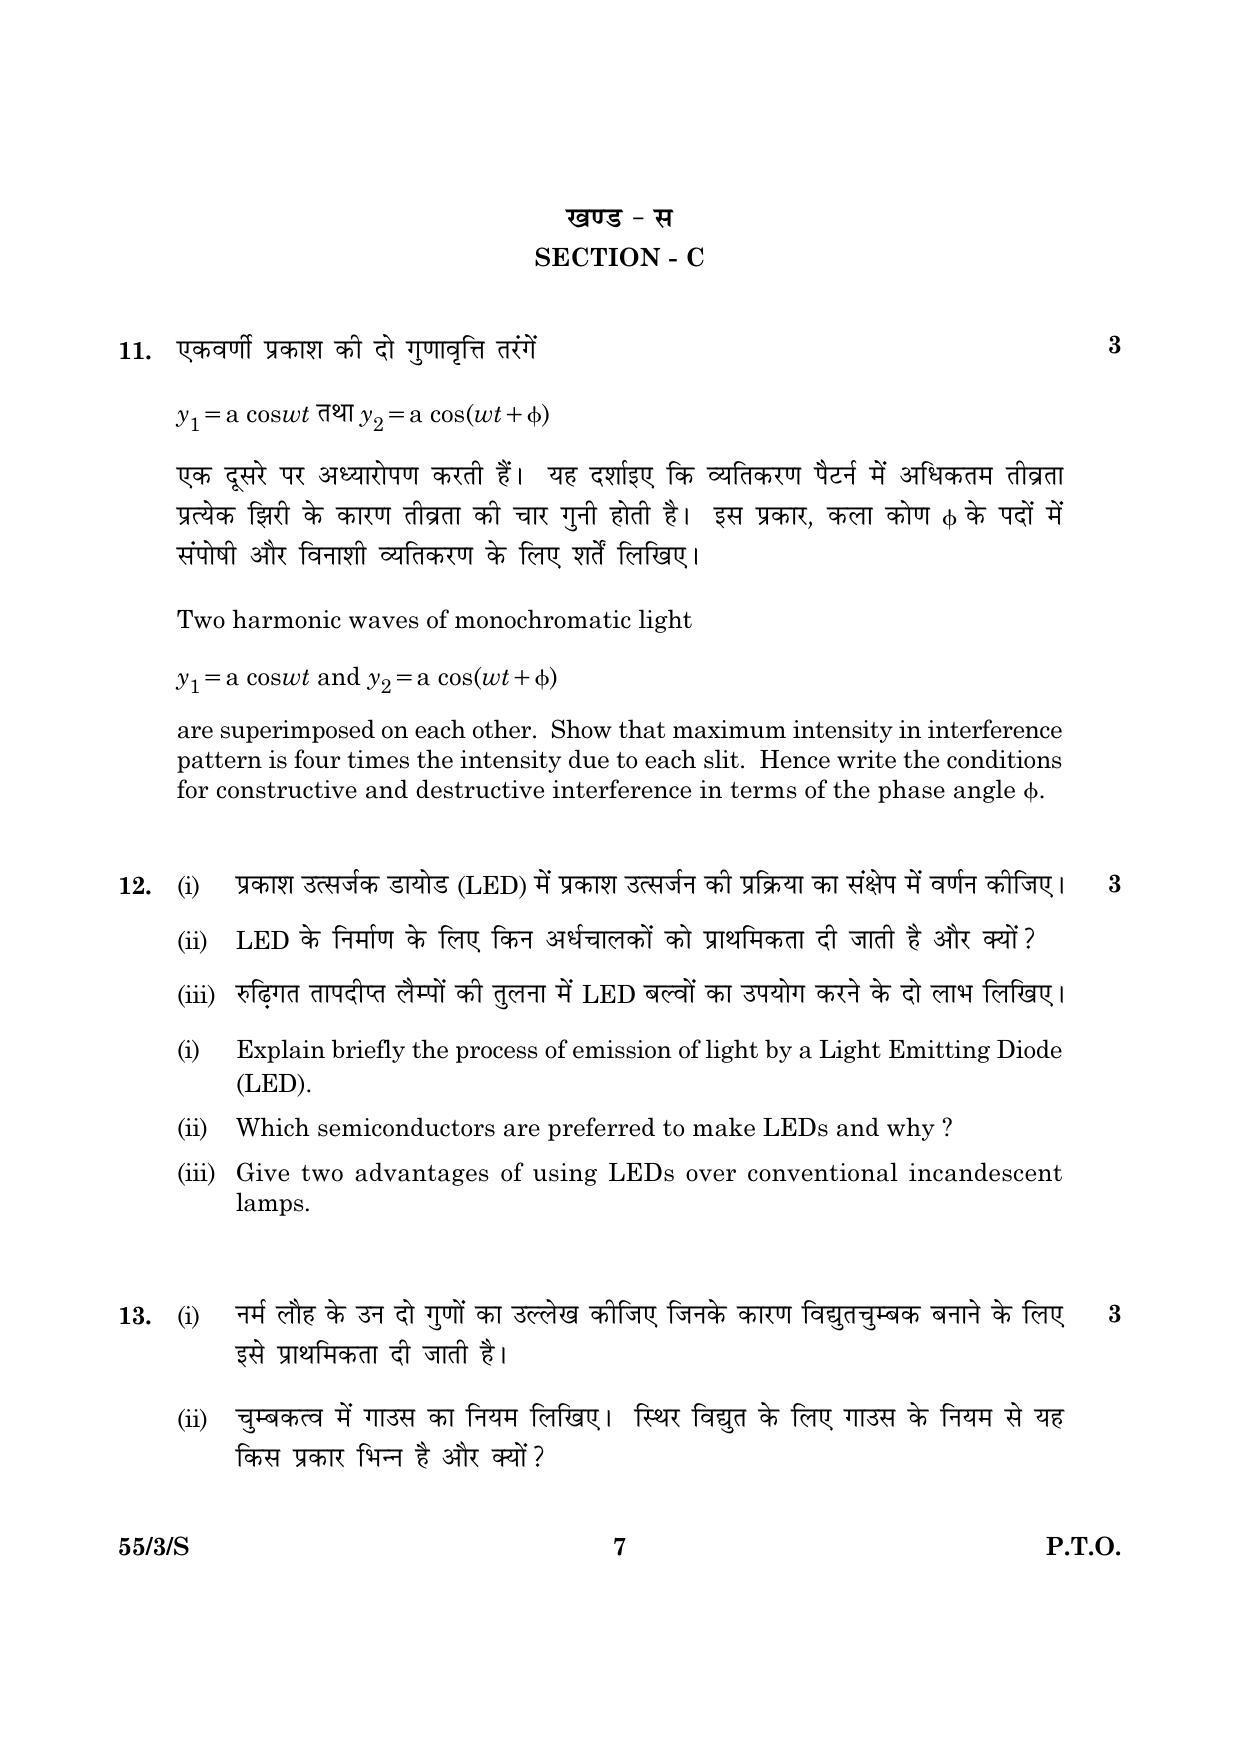 CBSE Class 12 055 Set 3 S Physics Theory 2016 Question Paper - Page 7